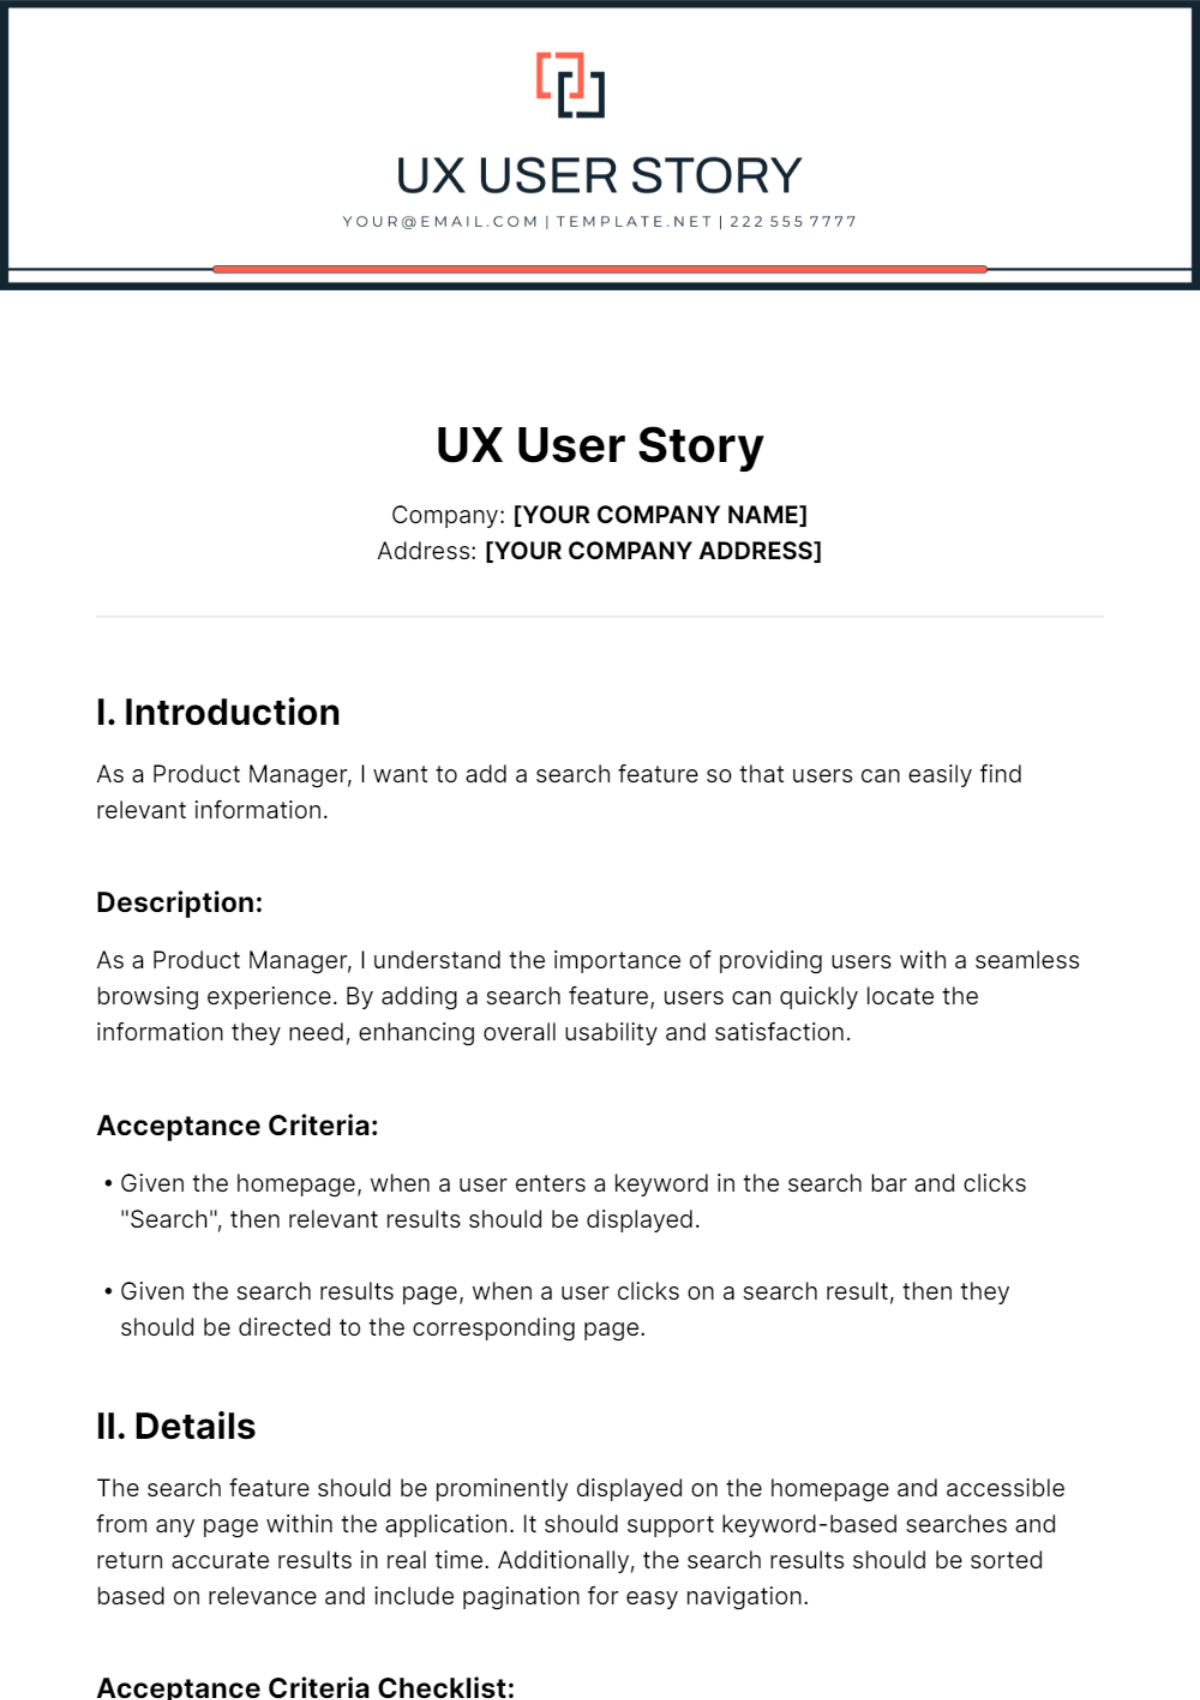 Free UX User Story Template